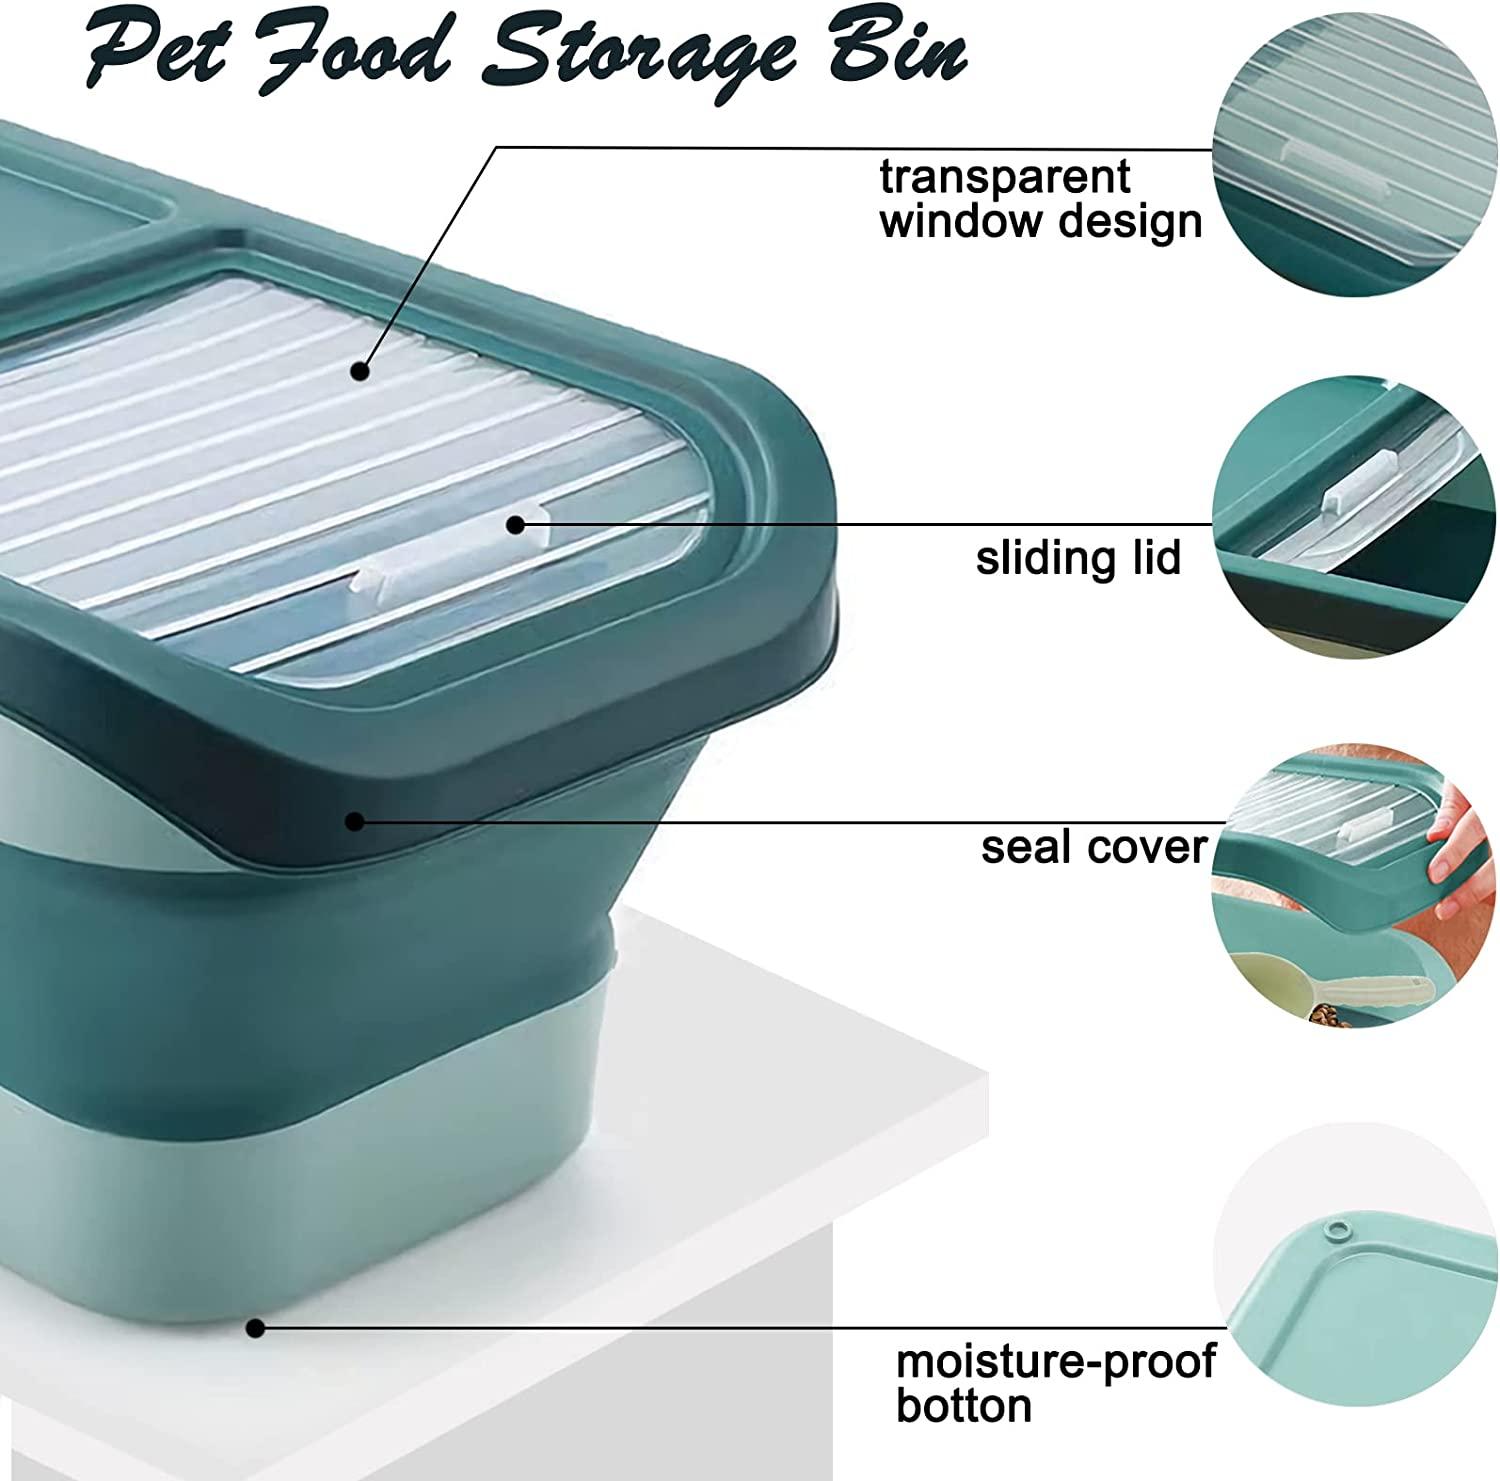 LKSTK 18 LB Green Dog Food Storage Container with Rolling Wheel,  Collapsible Dog Food Container with Travel Silicone Bowl and Scoop, Folded  Cat Food